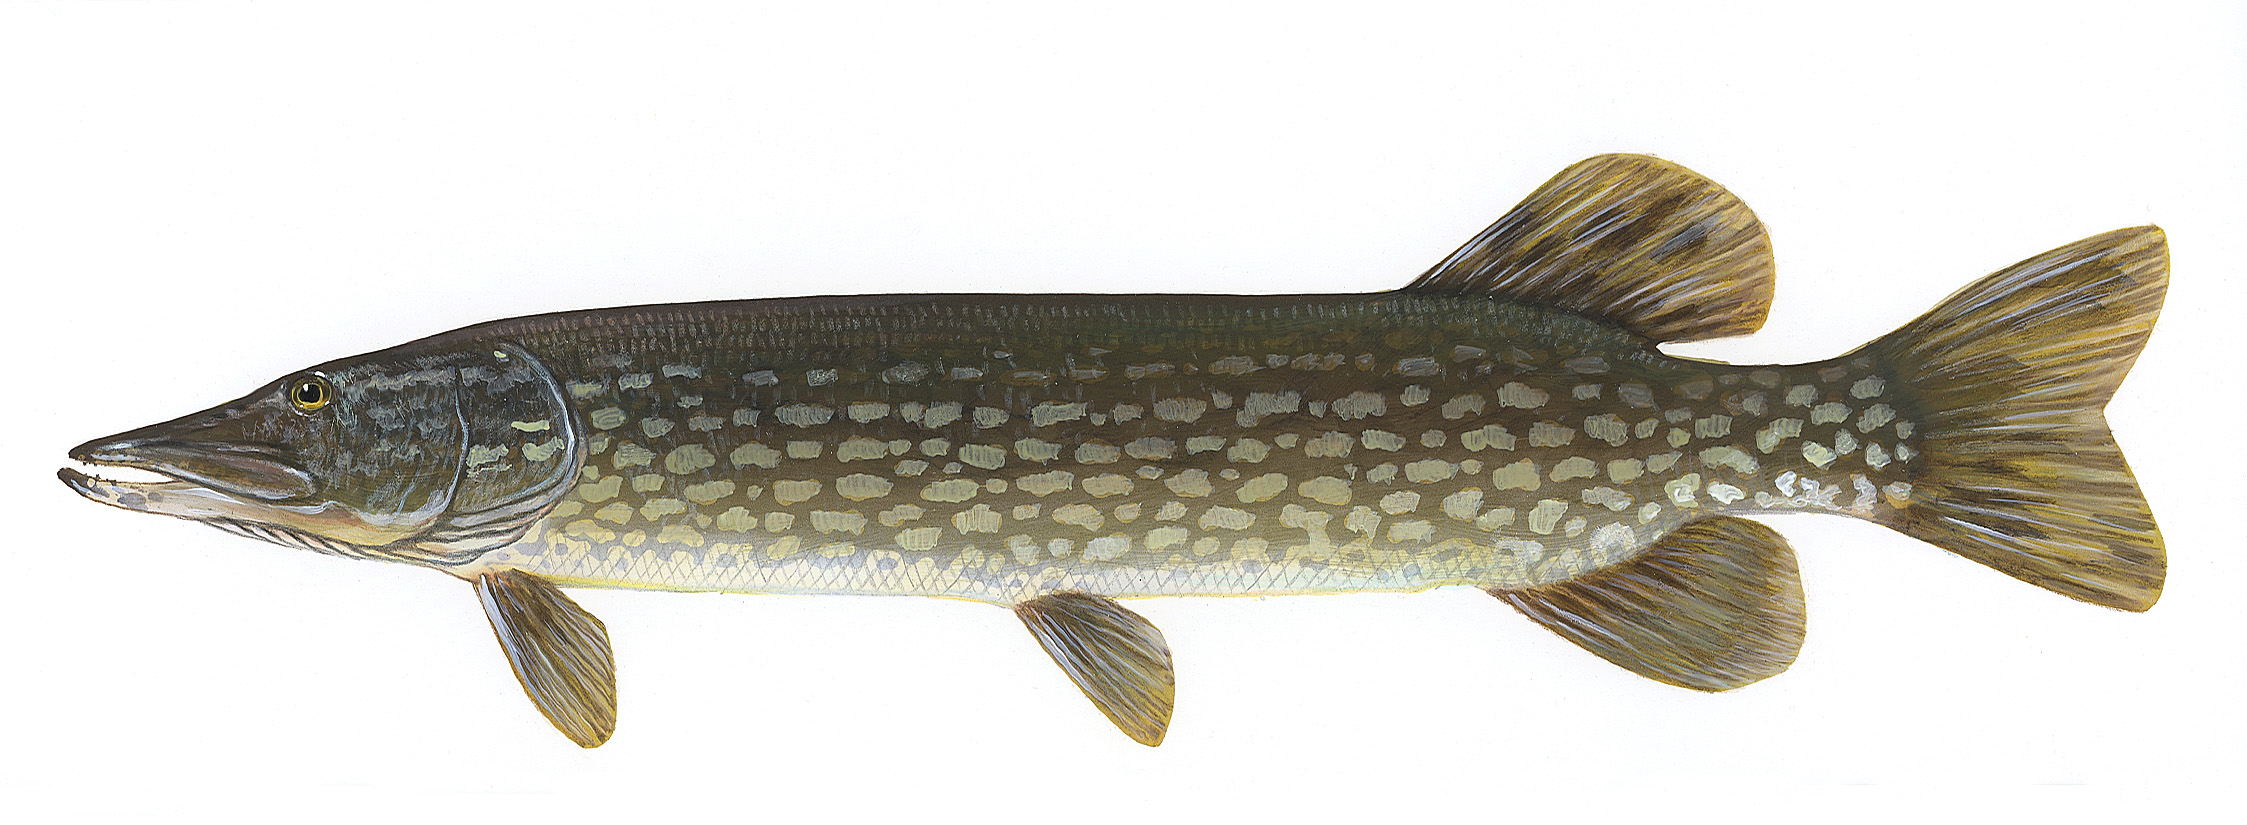 Northern Pike (Esox lucius).